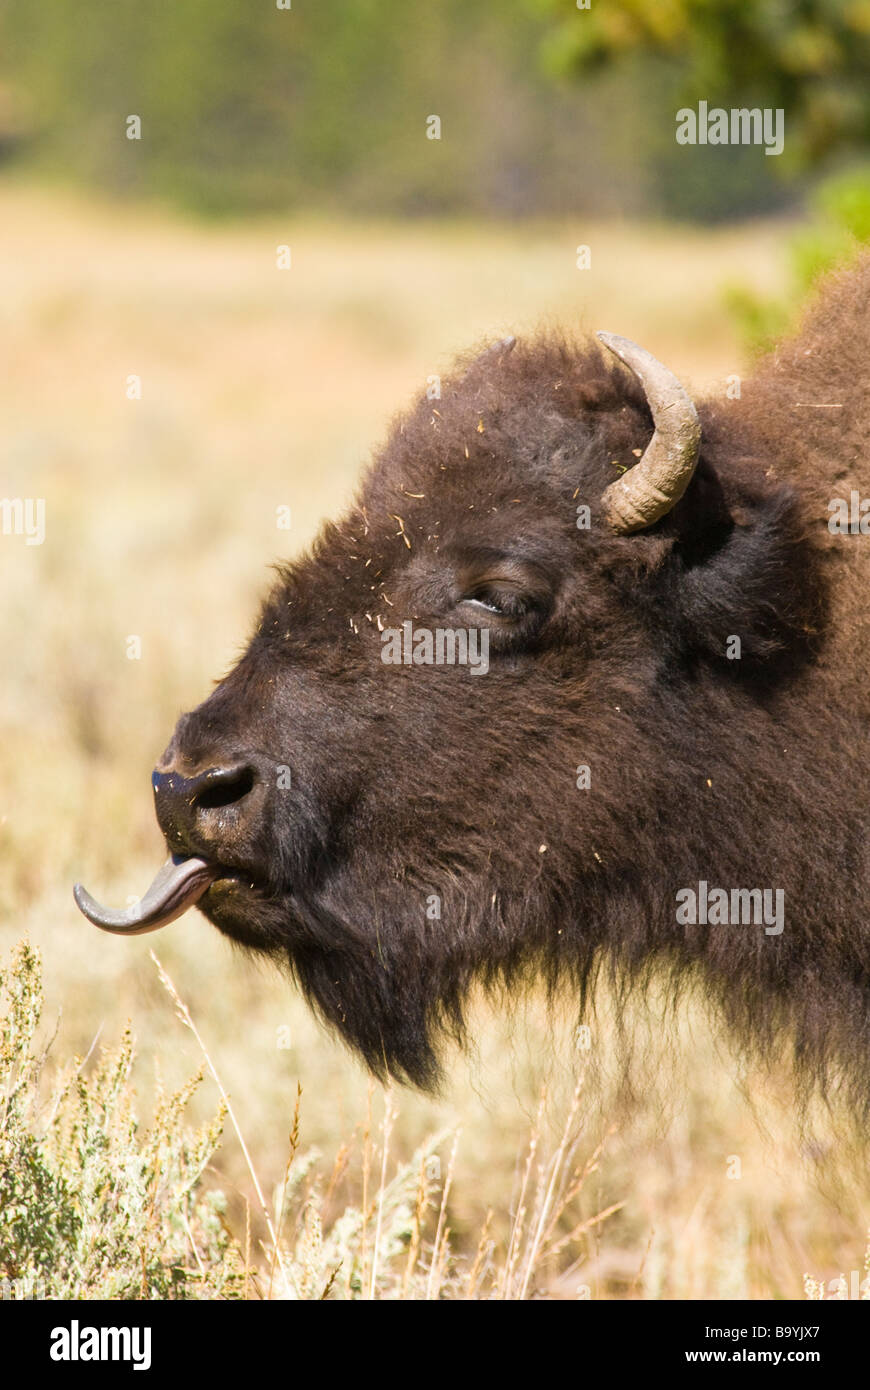 Buffalo Tongue High Resolution Stock Photography and Images - Alamy